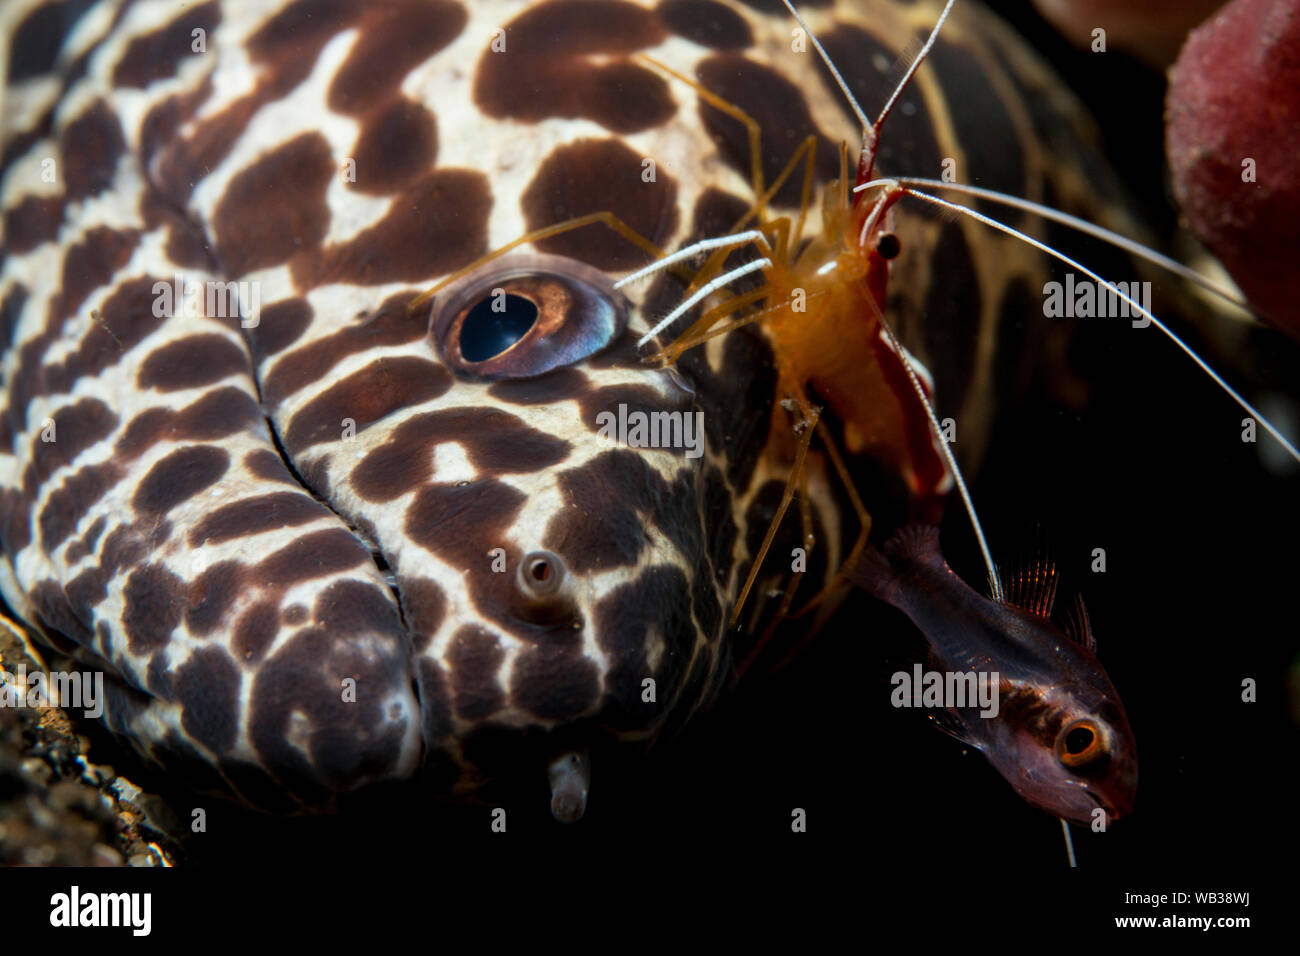 Moray Eel Manicured by Cleaner Shrimp, Bali Indonesia Stock Photo